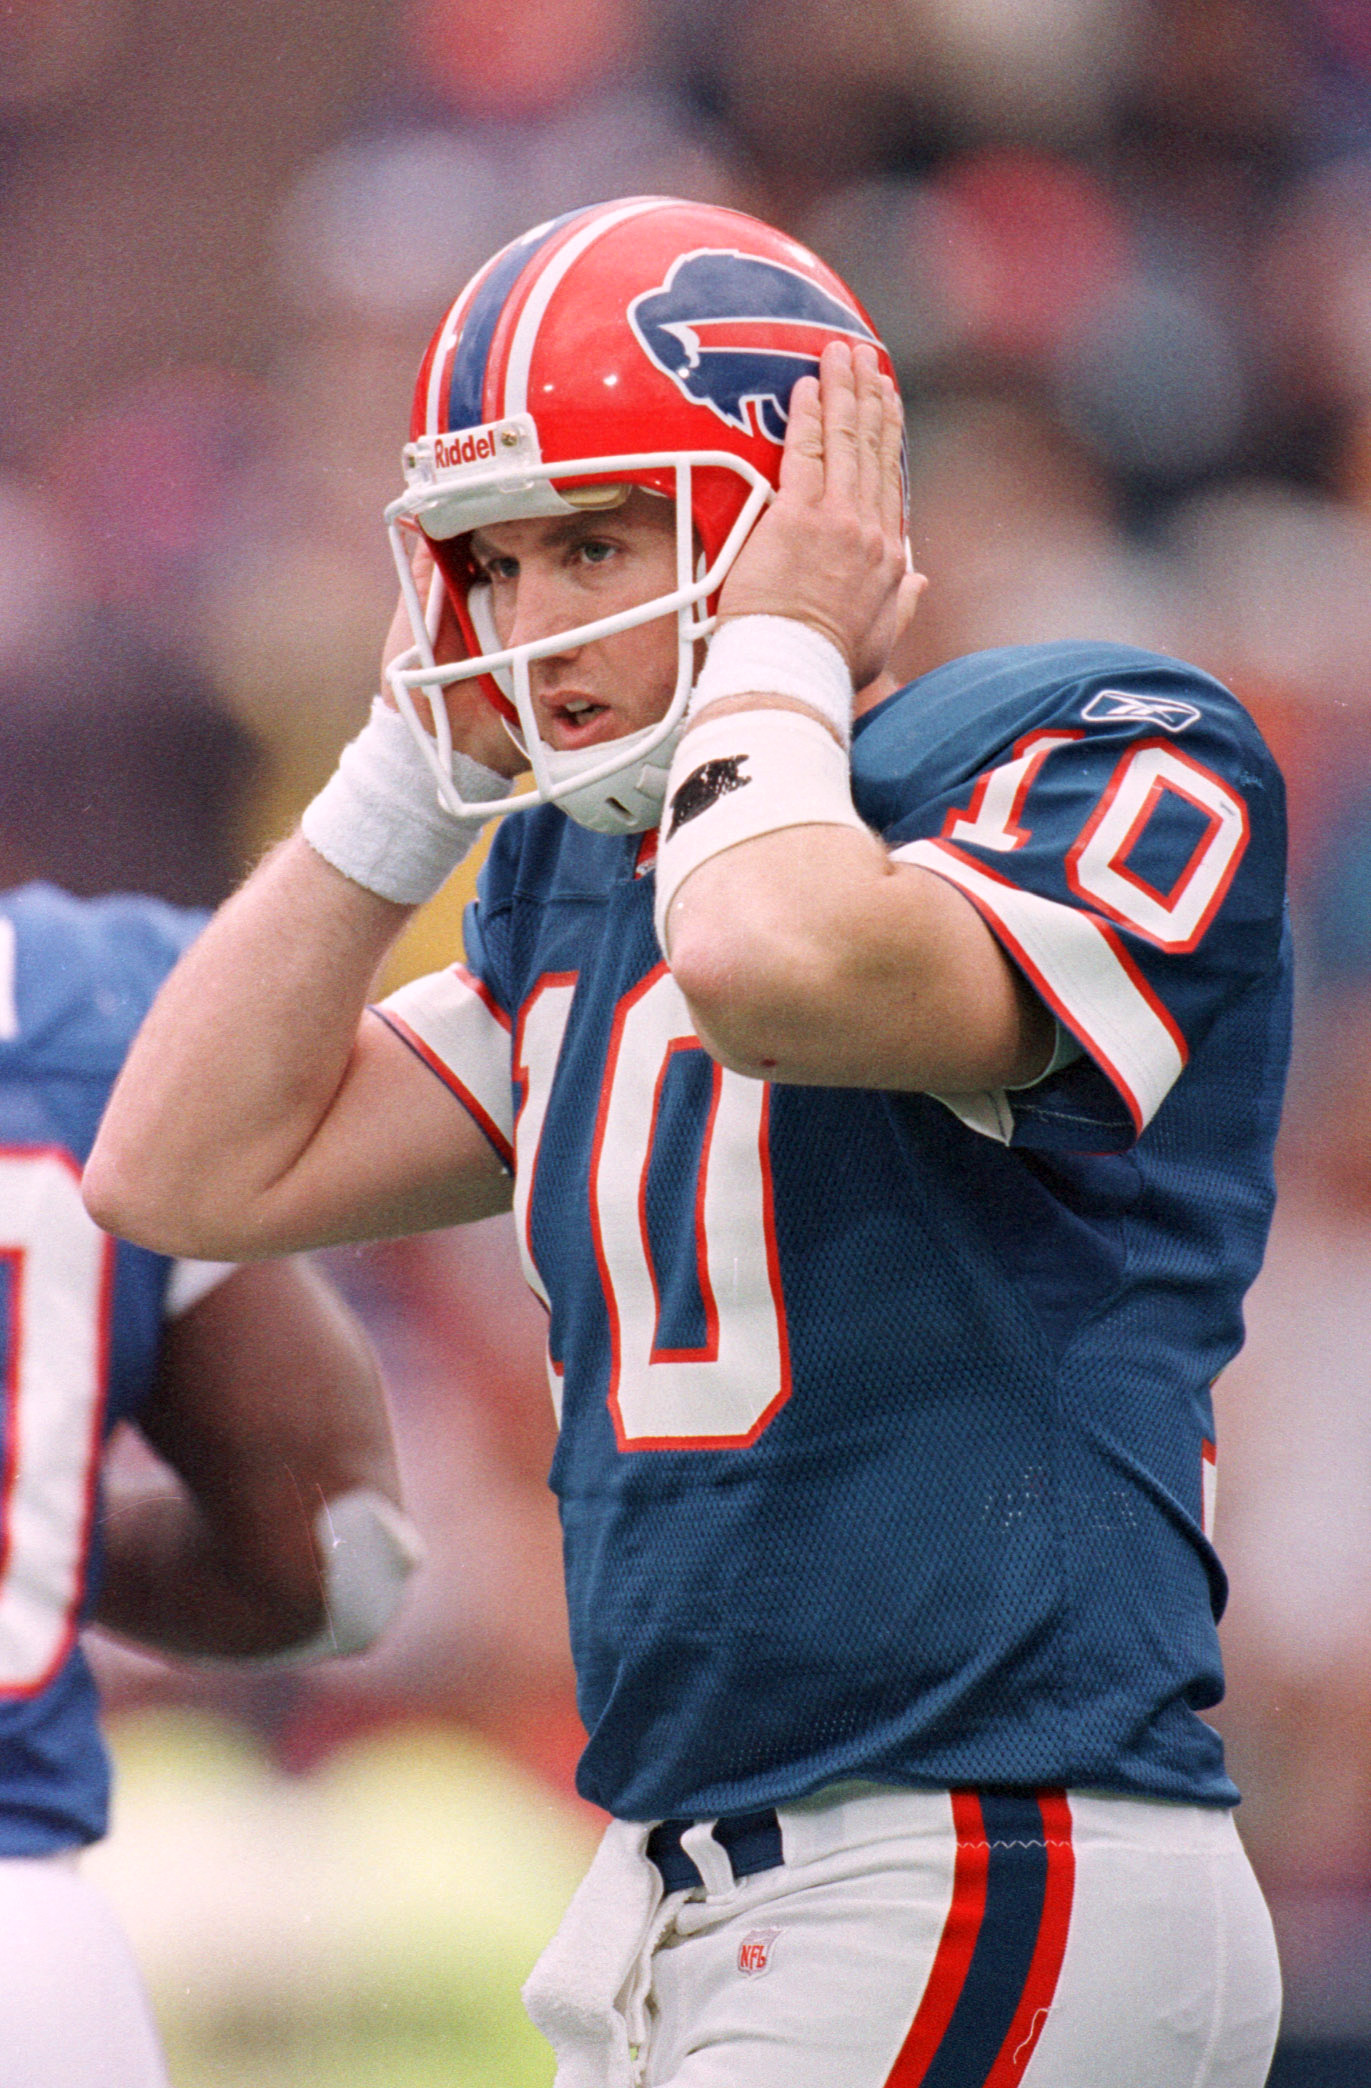 25 Nov 2001:  Alex Van Pelt #10 of the Buffalo Bills tries to hear instructions through his helmet headset against the Miami Dolphins during a game at Ralph Wilson Stadium in Orchard Park, New York. Miami won 34-27.